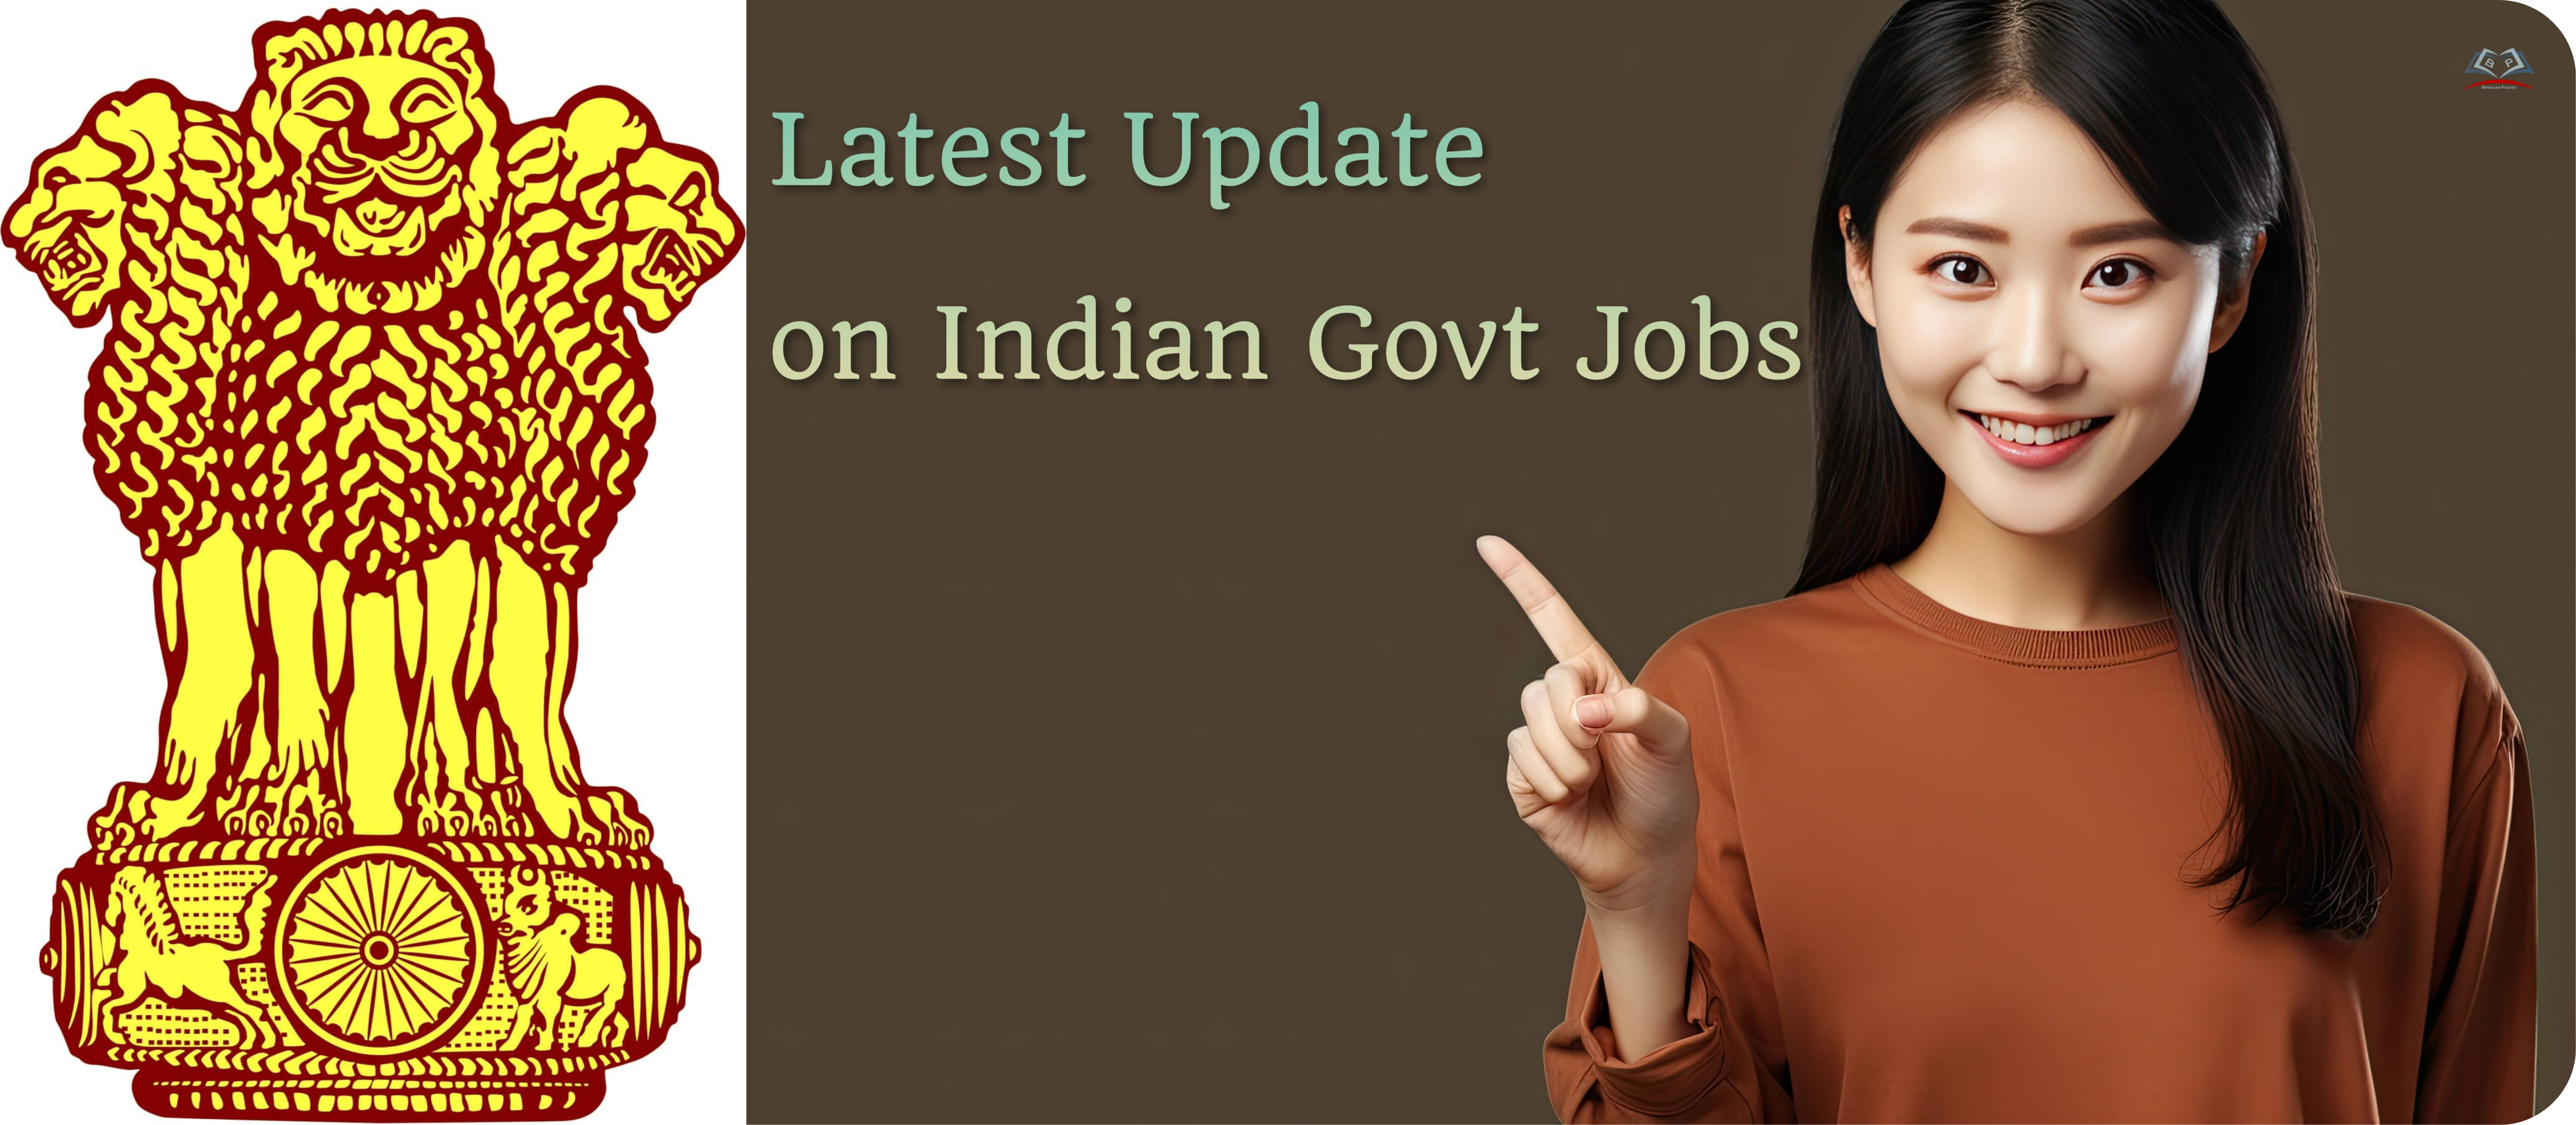 Latest Update on Indian Govt Jobs